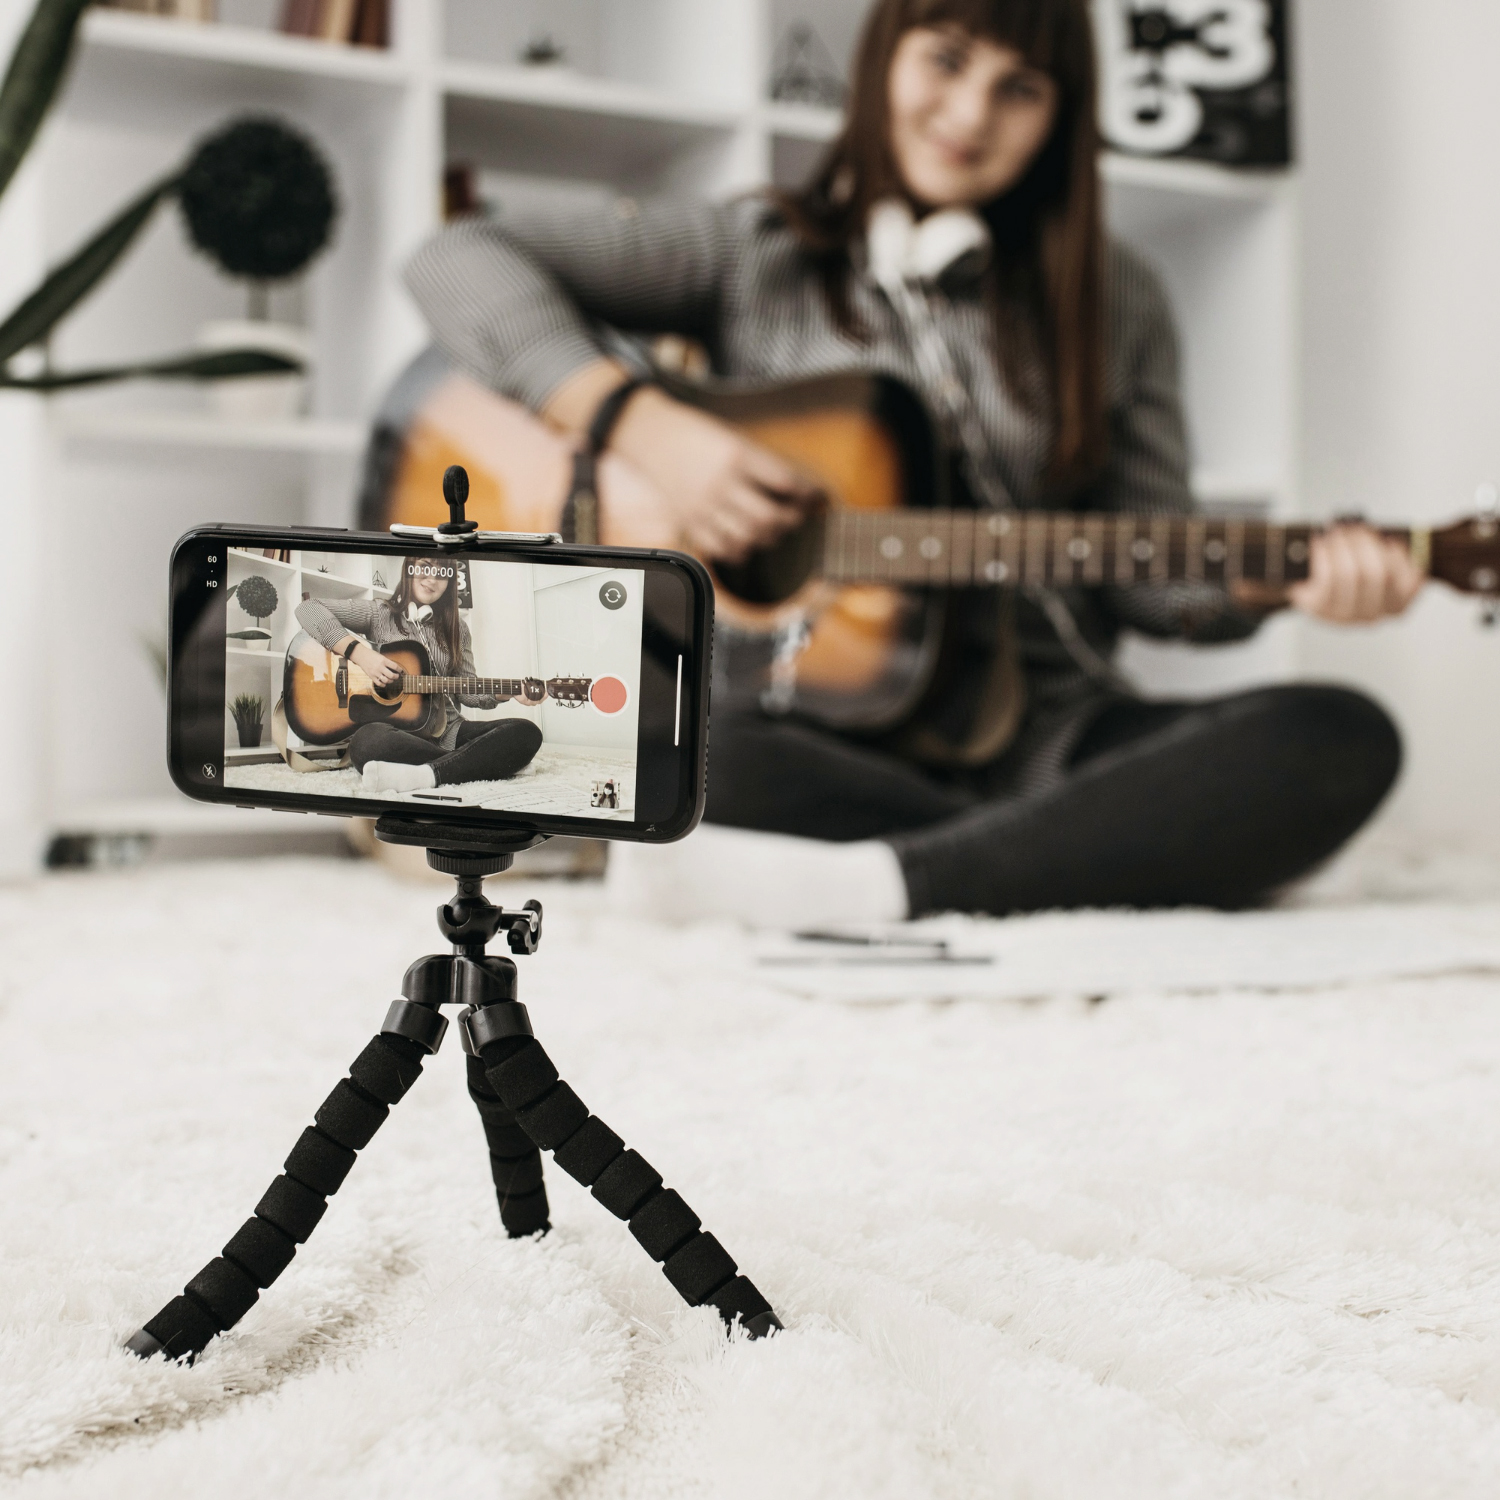 blogueuse-streaming-cours-guitare-appareil-photo-smartphone-maison